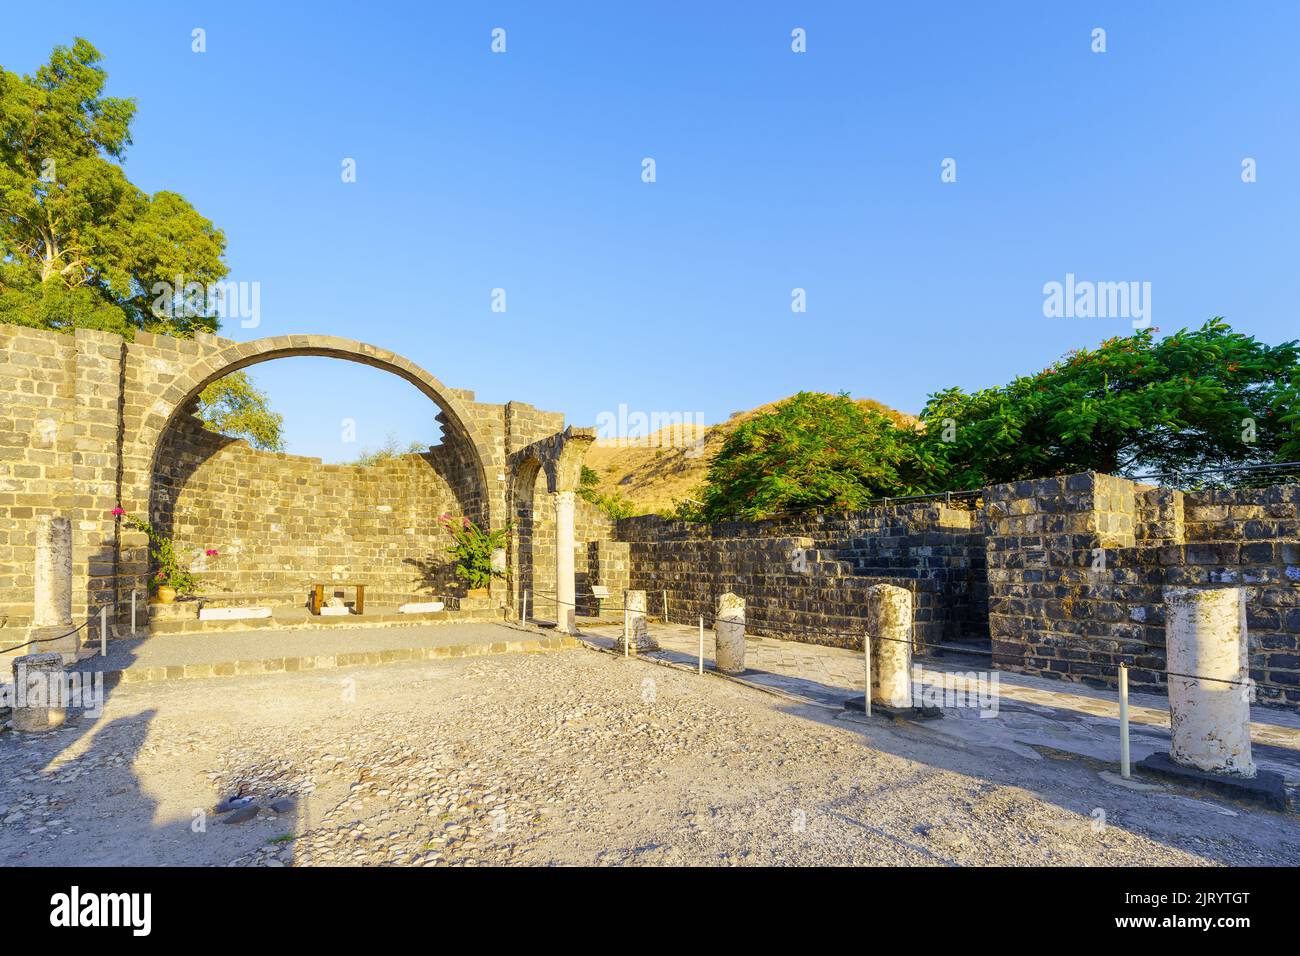 View of ruins of the Byzantine monastery and church, in Kursi National Park, traditionally the site of the Miracle of the Swine. Northern Israel Stock Photo